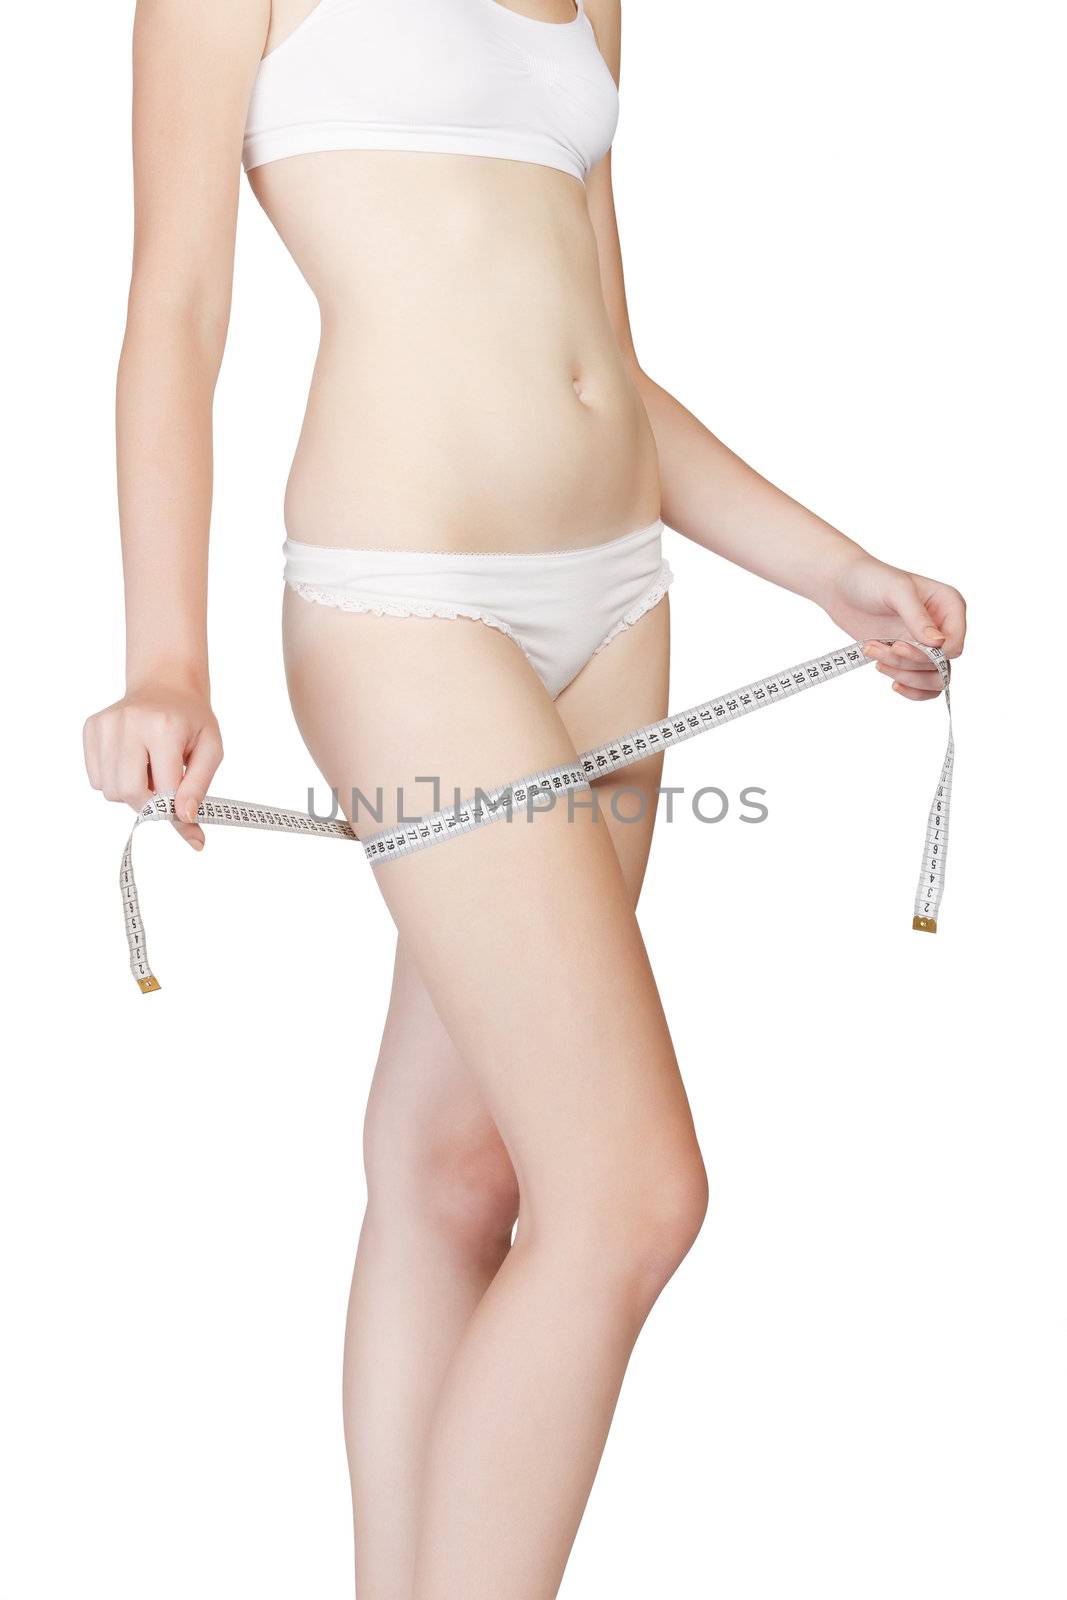 Woman measuring her thigh with a white metric tape. Isolated on white background